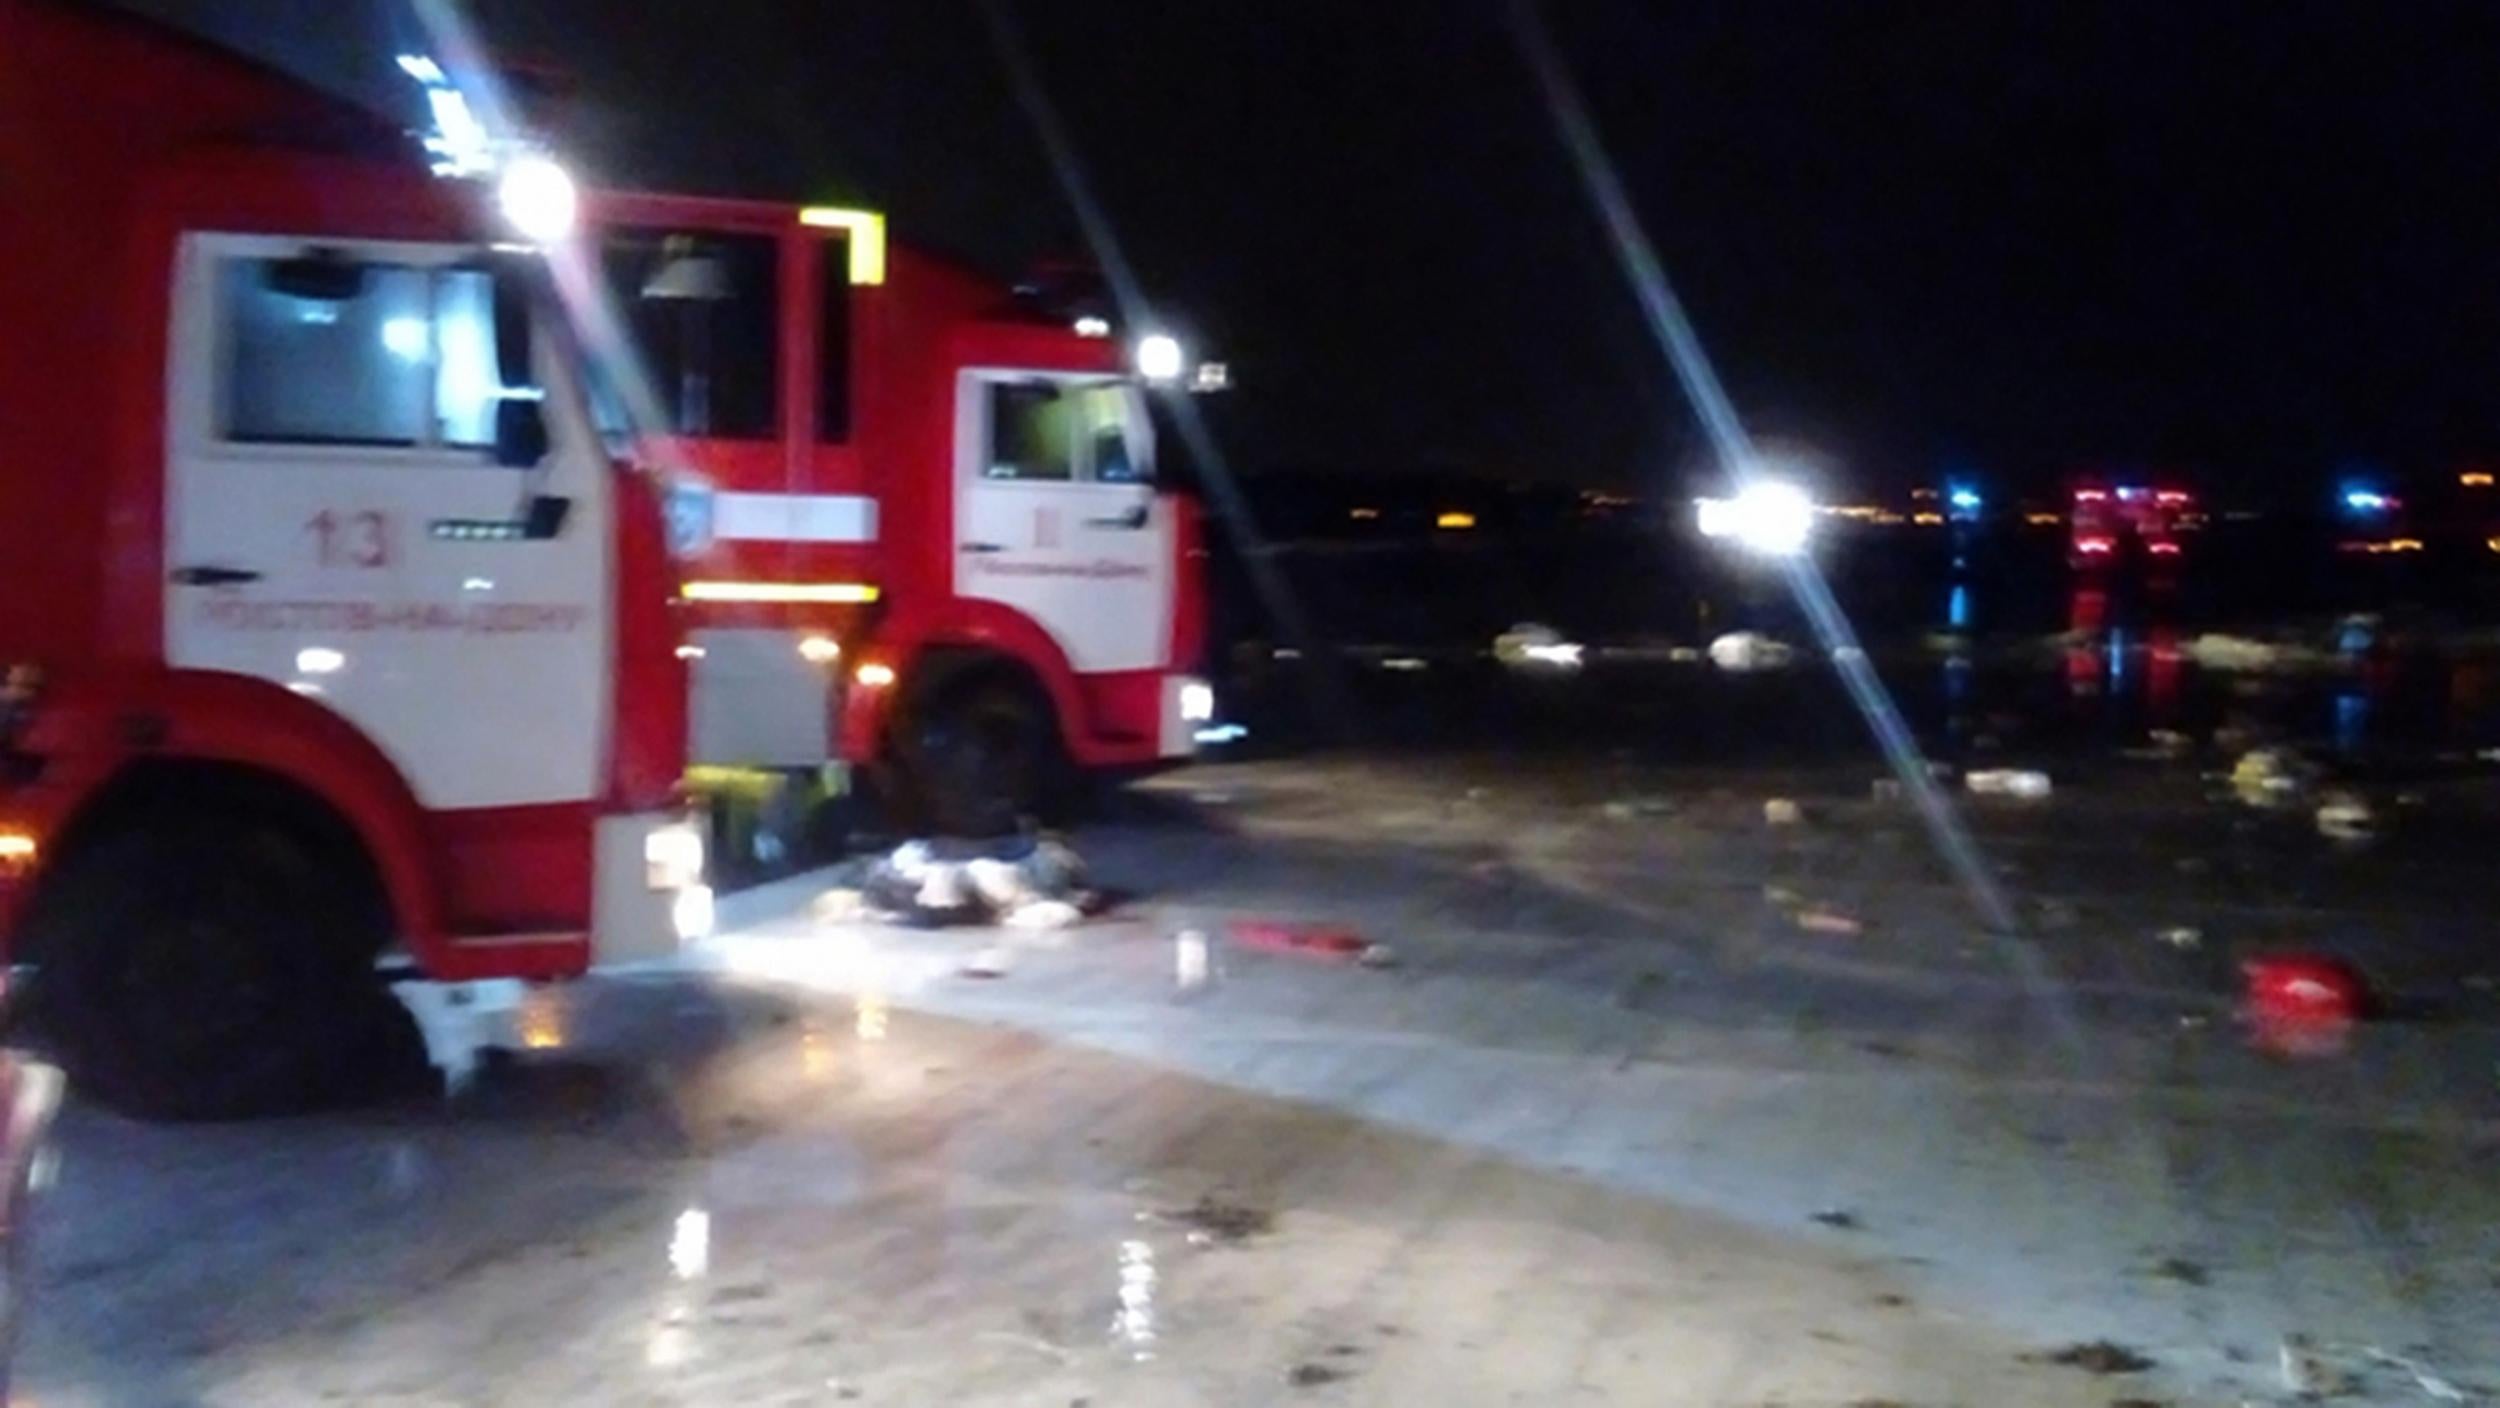 Russian emergency trucks are seen near the area of the plane crash at the Rostov-on-Don airport